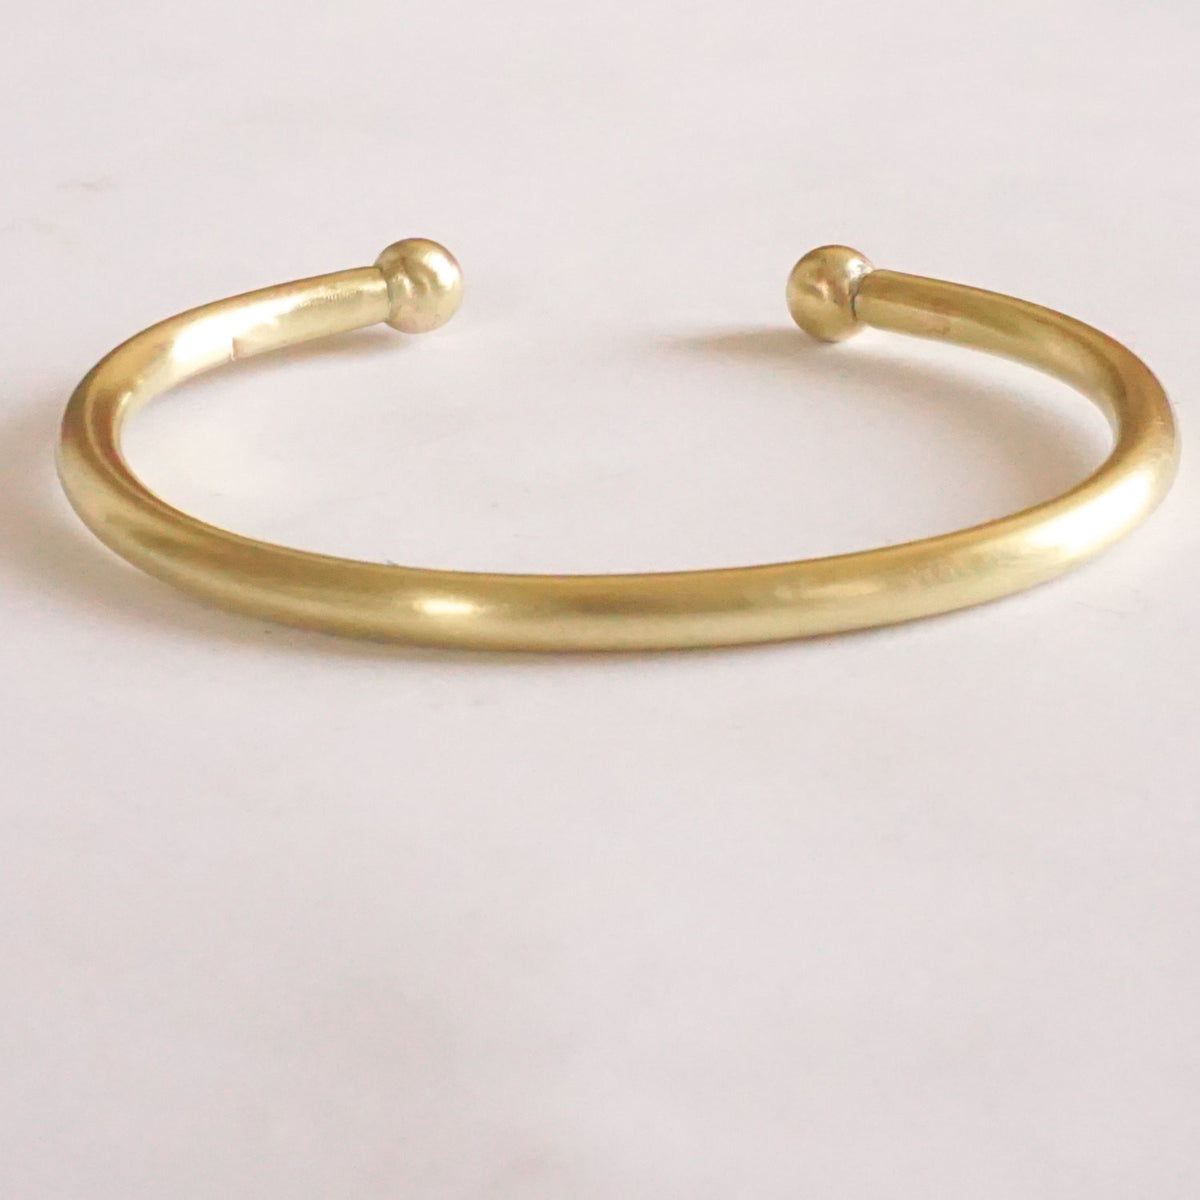 Classic Hand-Made Gold Colored Brass or Sterling Silver Torque Bracelet w/ Solid Ball Ends - 0198 - Virginia Wynne Designs